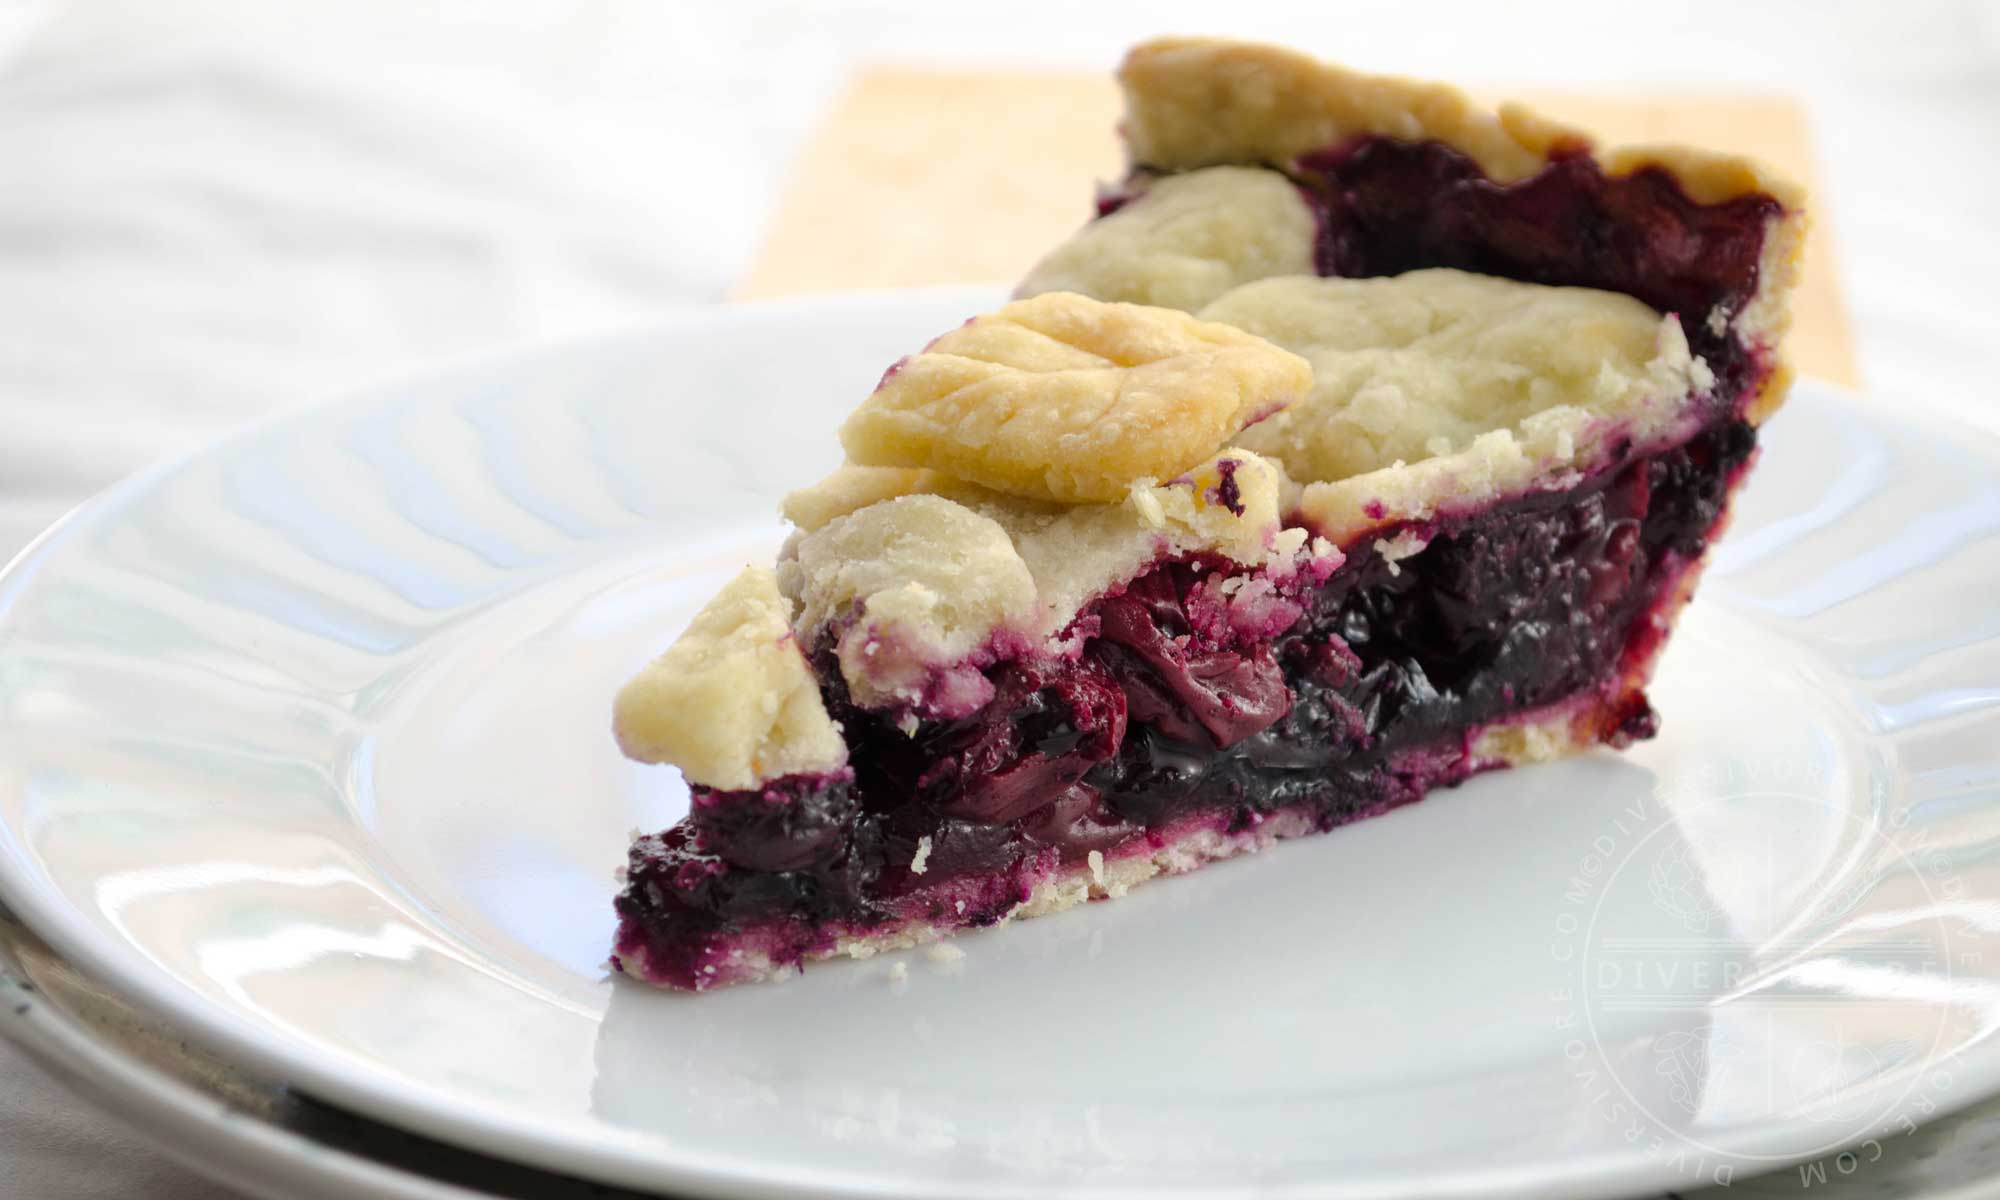 Featured image for “Cherry Blueberry Pie”